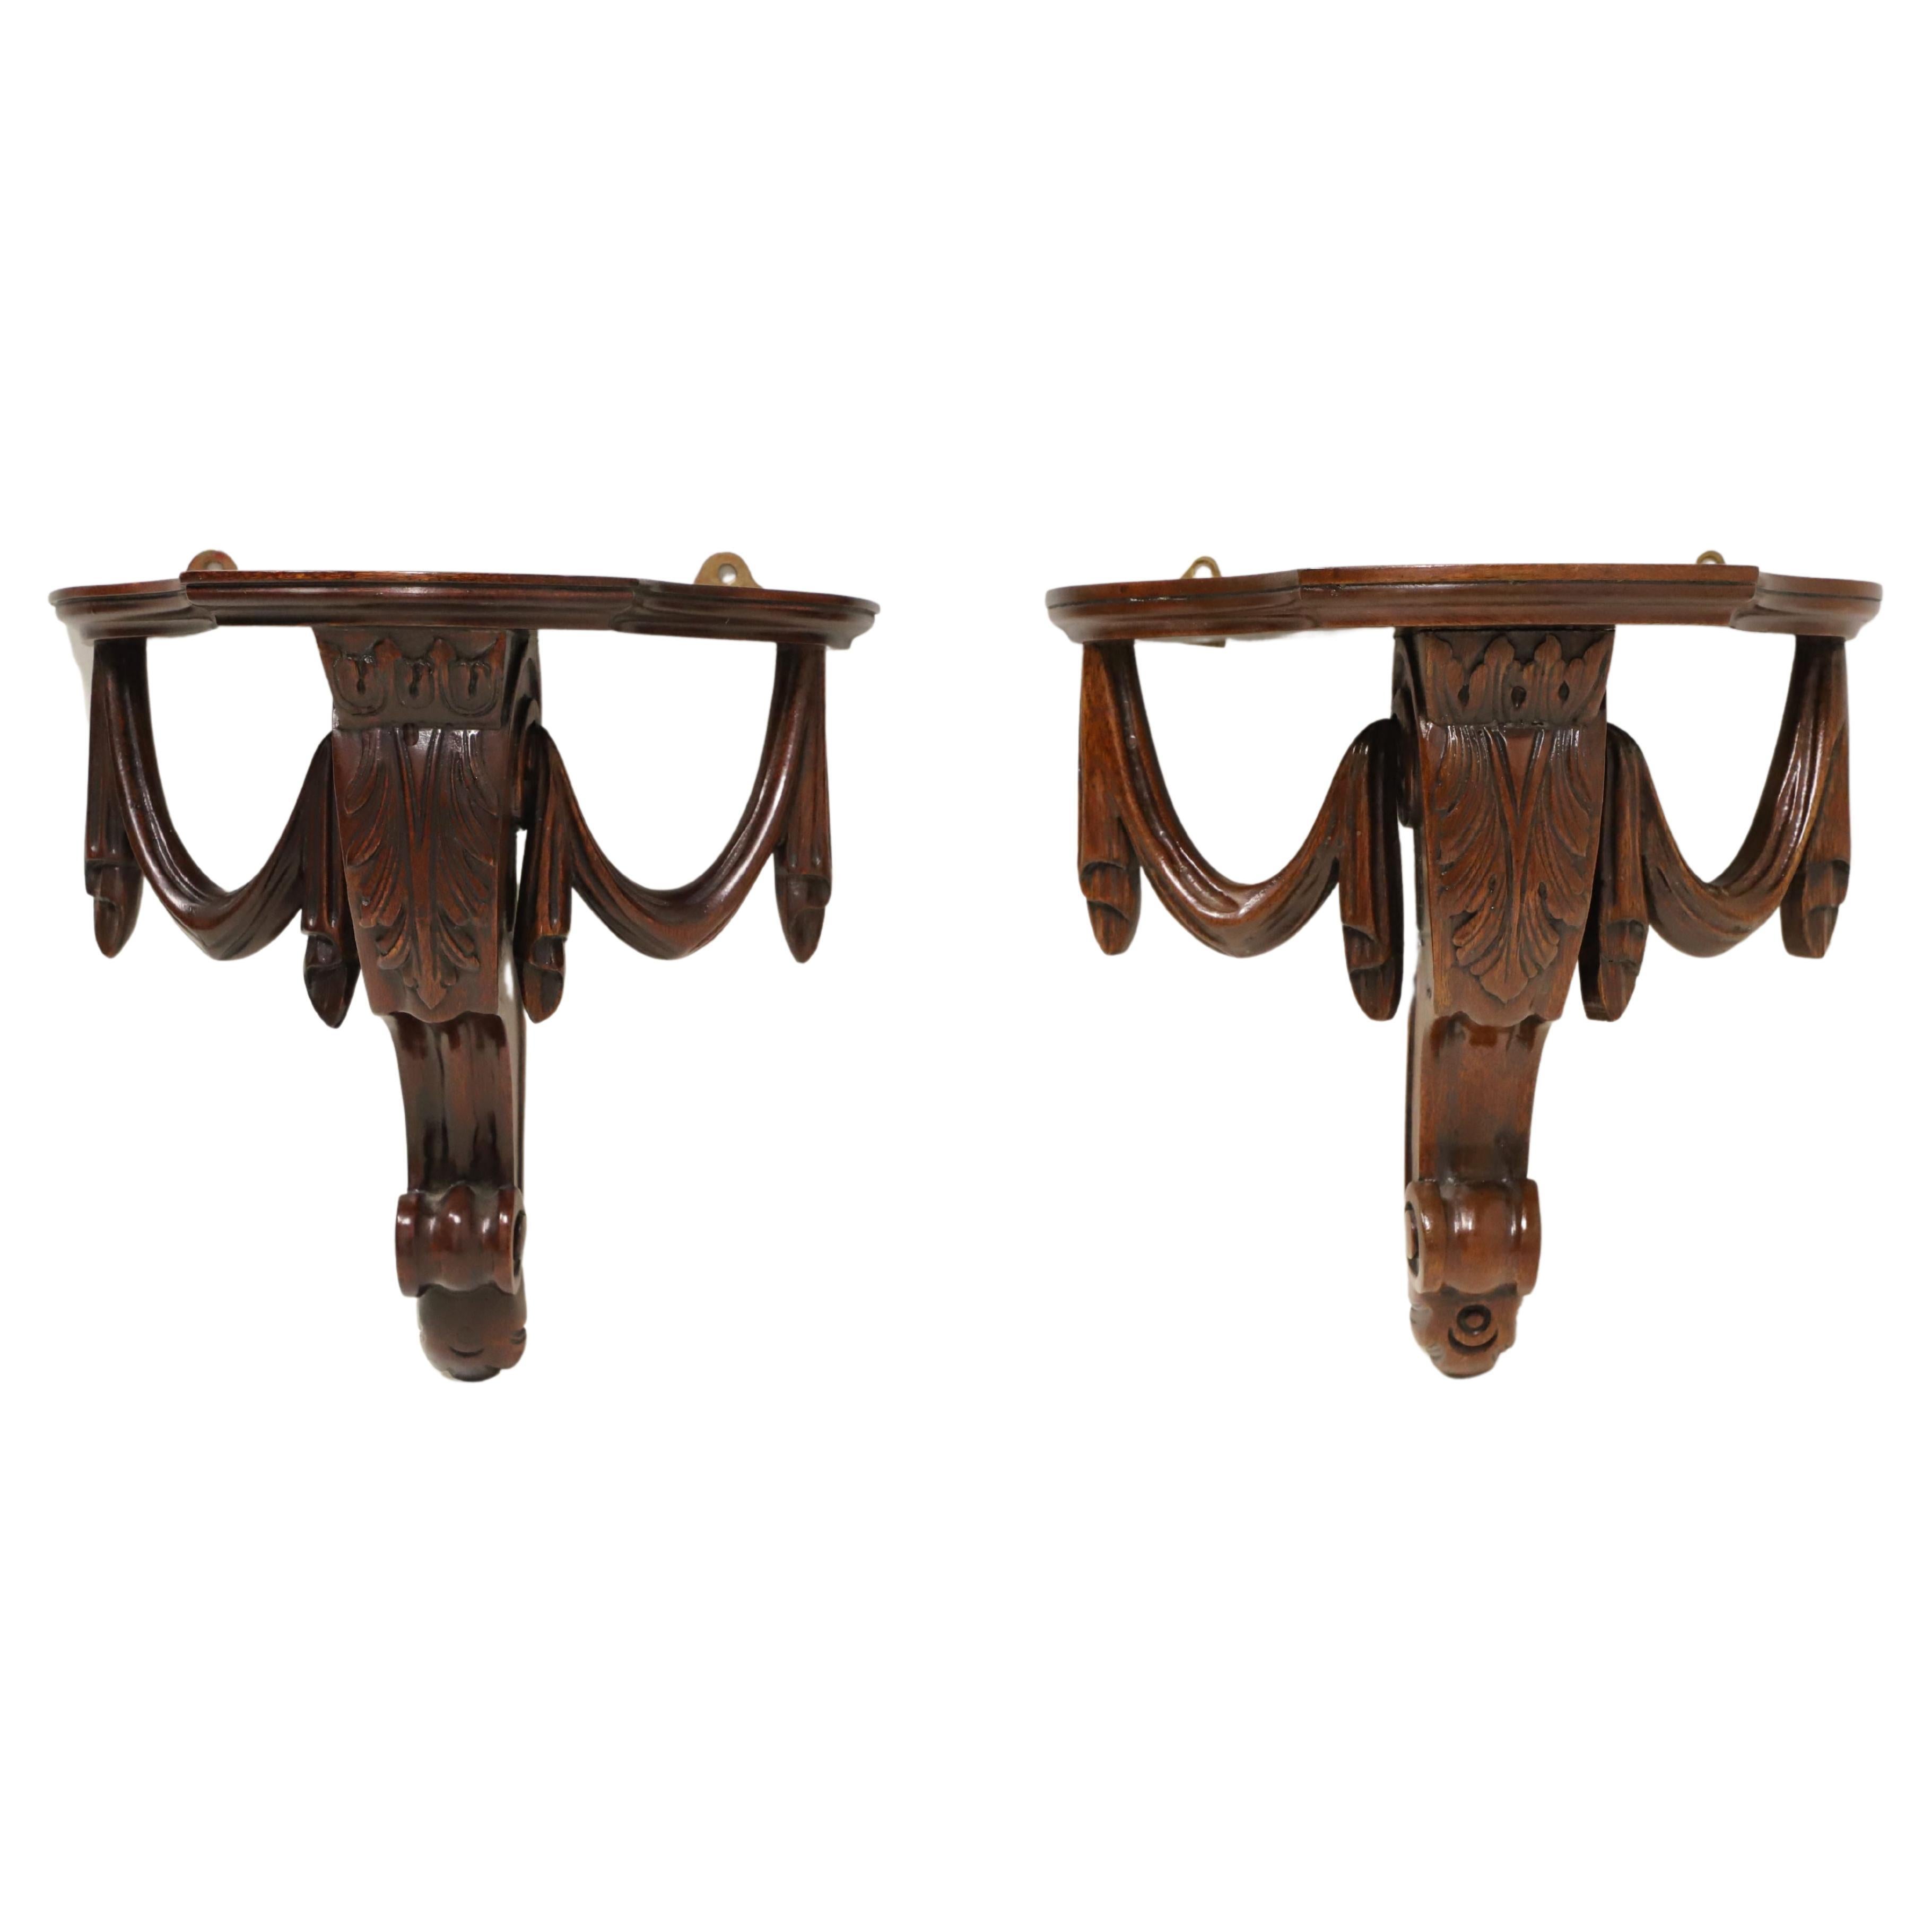 Late 20th Century Carved Mahogany Acanthus Leaf Wall Bracket Shelves - Pair